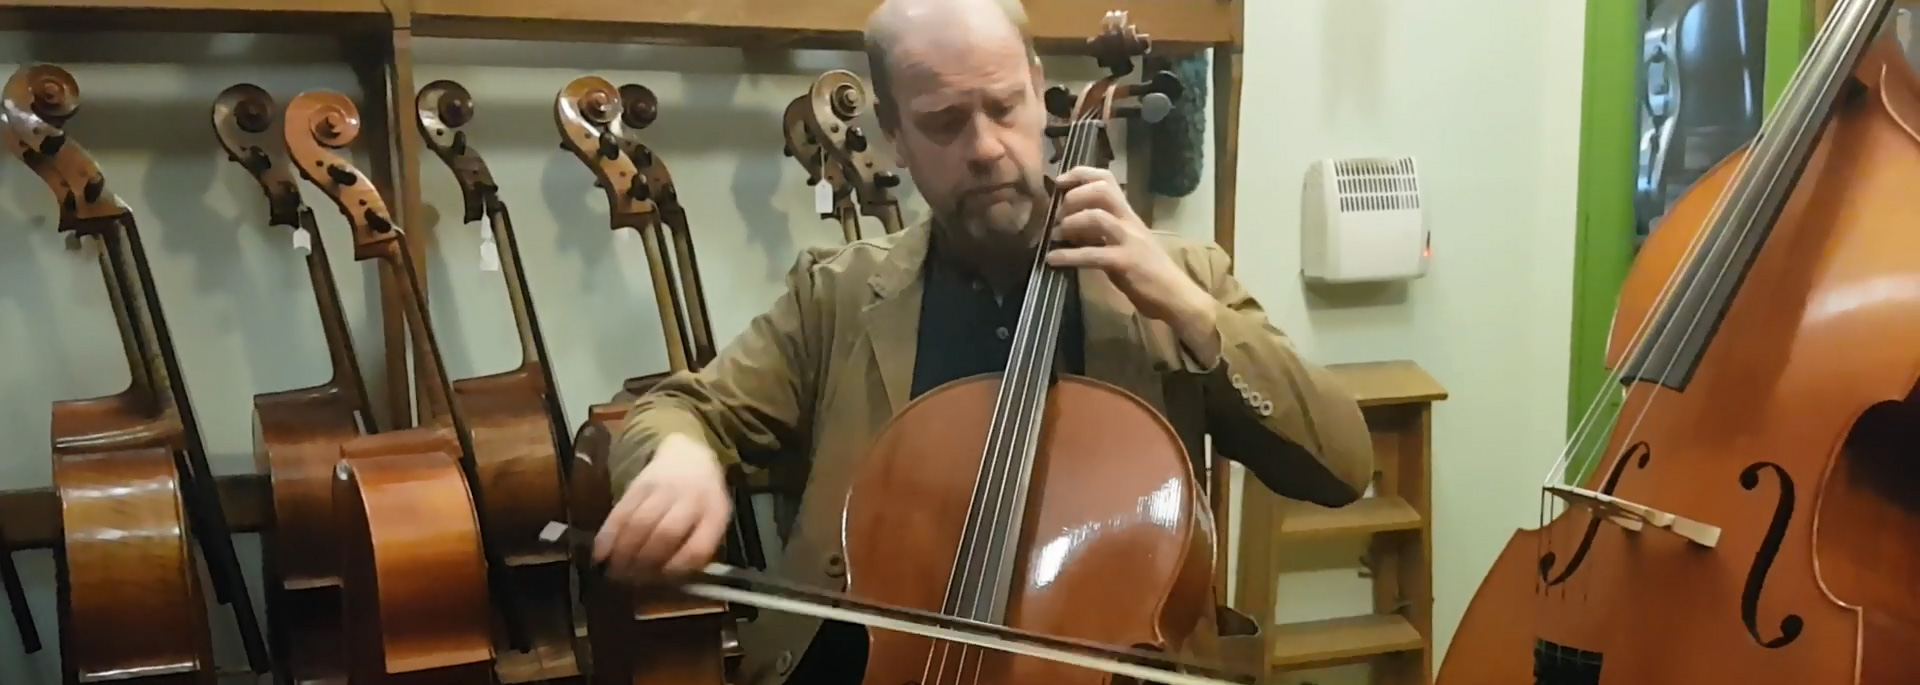 Richard Tunnicliffe plays Corrente from Bach’s first cello suite BWV1007 on his new Yann Besson Cello